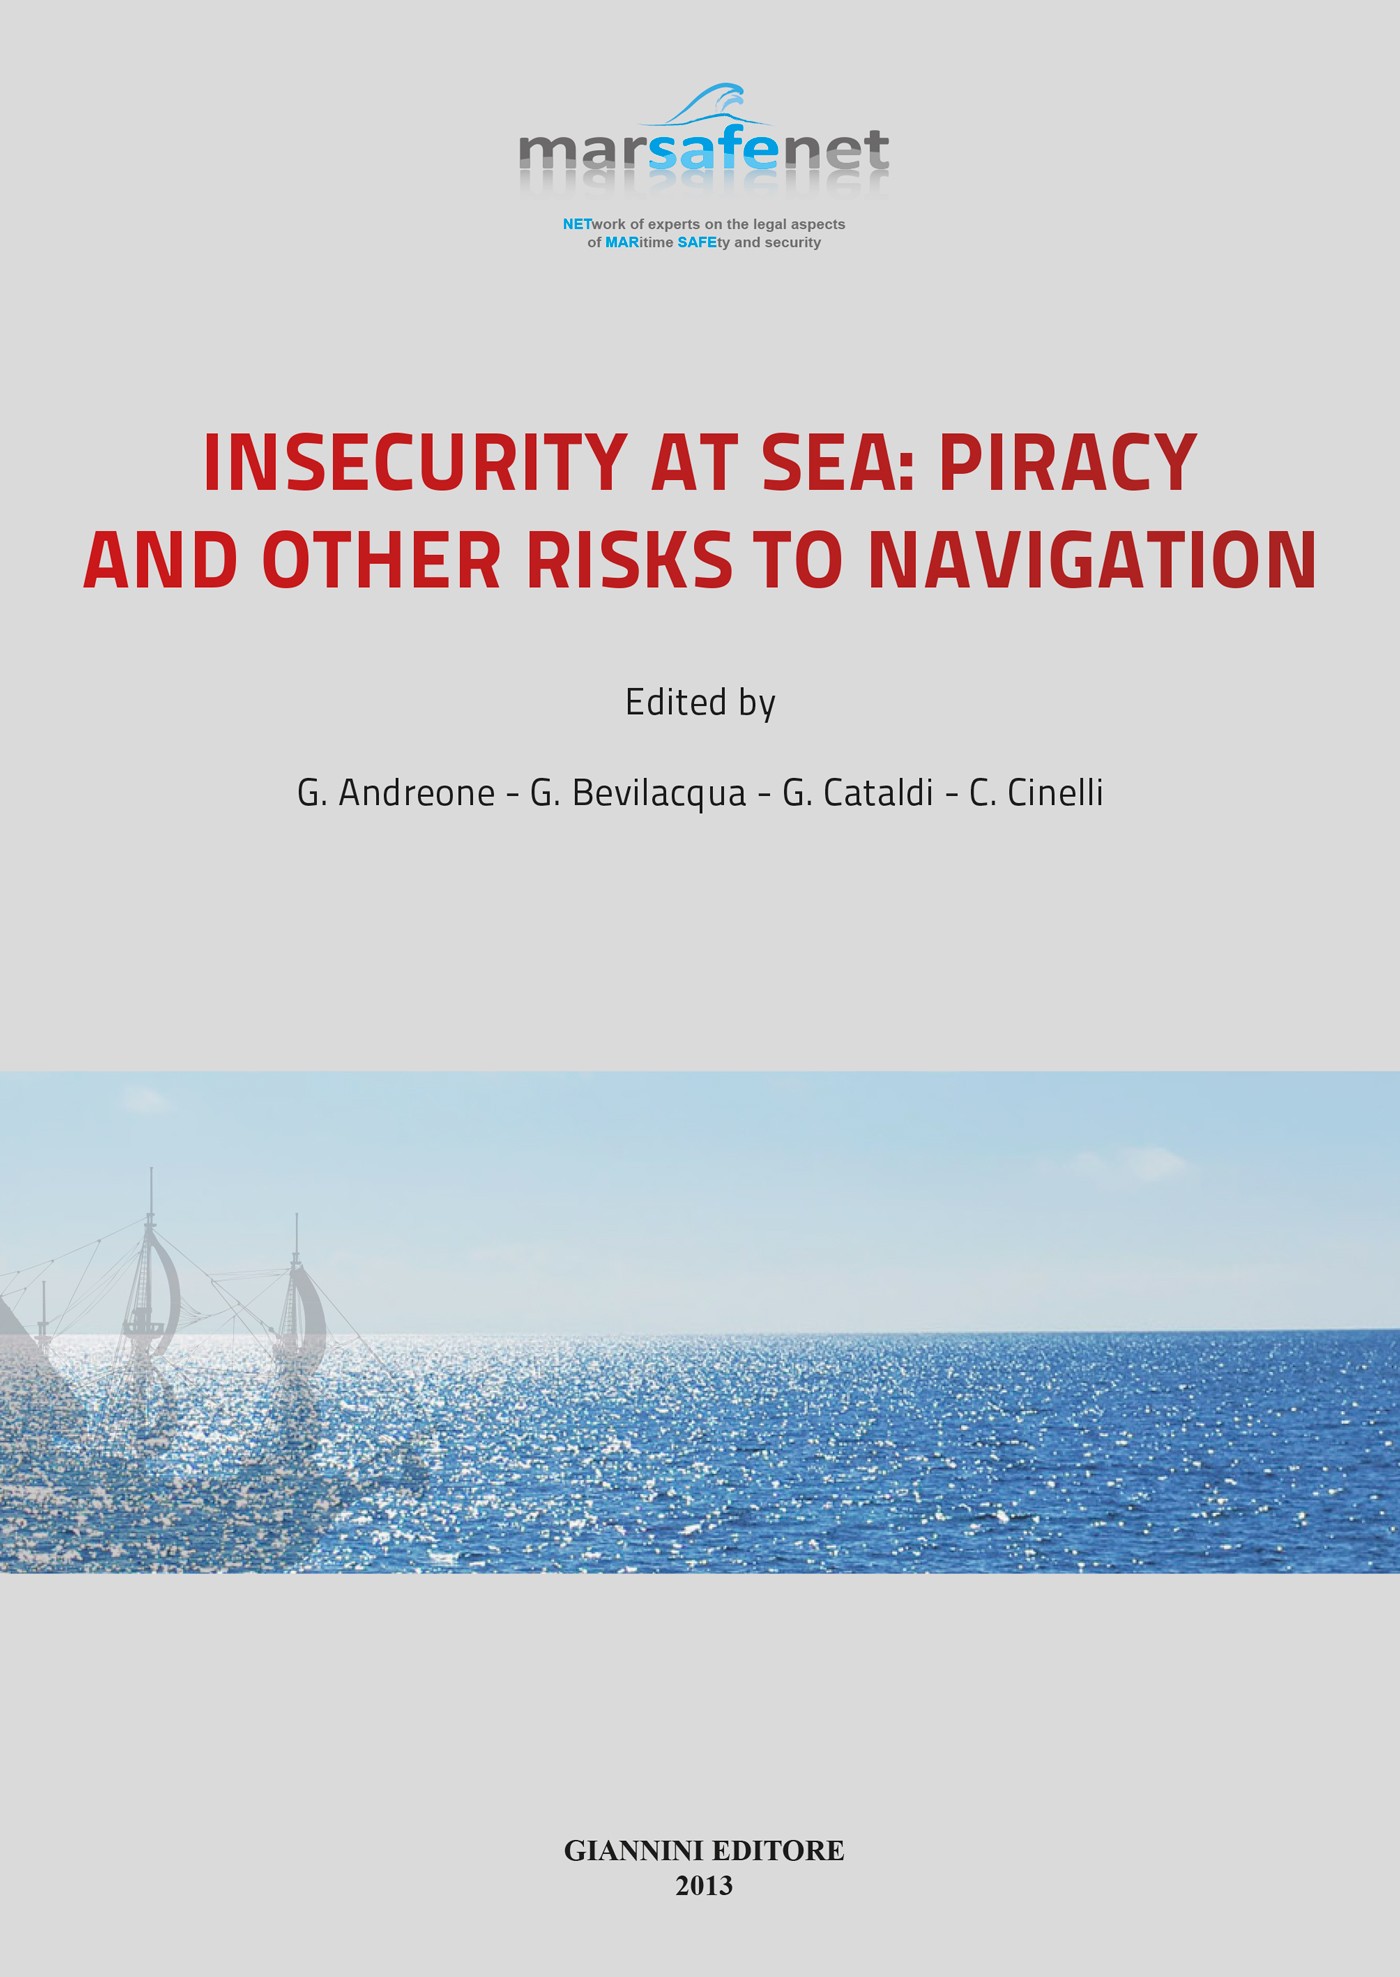 Insecurity at sea: piracy and other risks to navigation - Librerie.coop